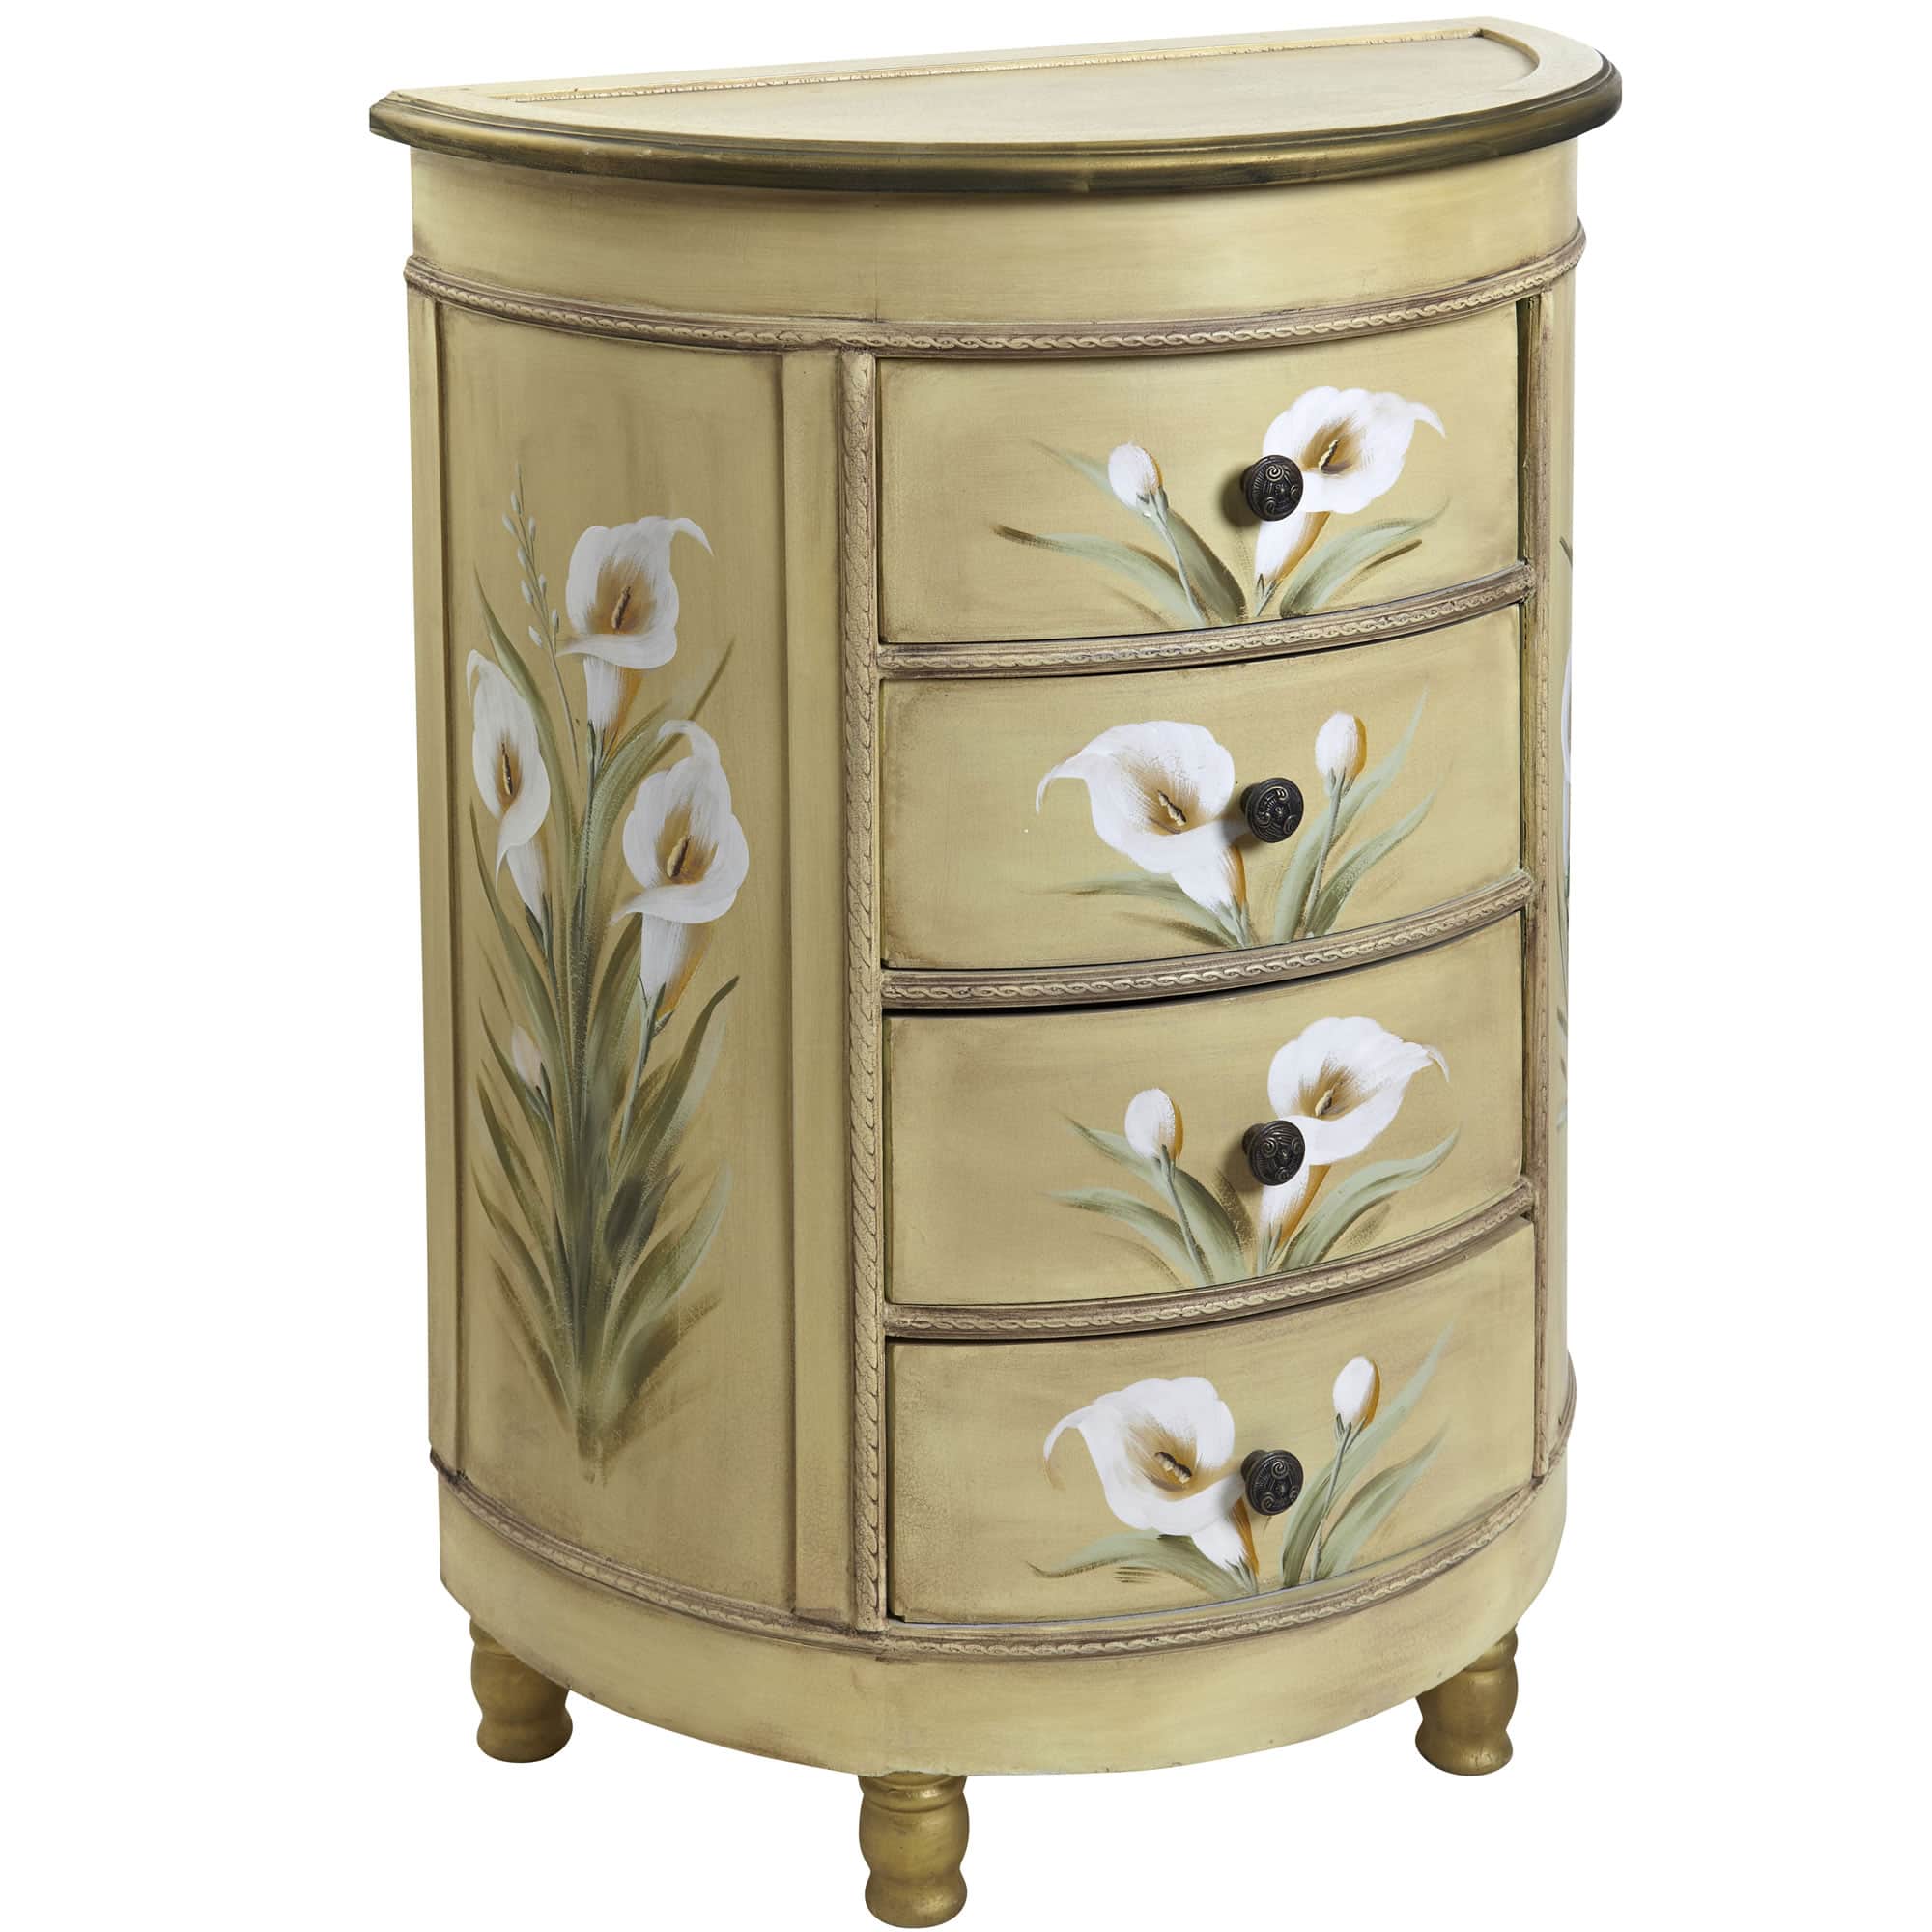 4-Drawer Antique Accessory Table with Calla Lily Floral Art